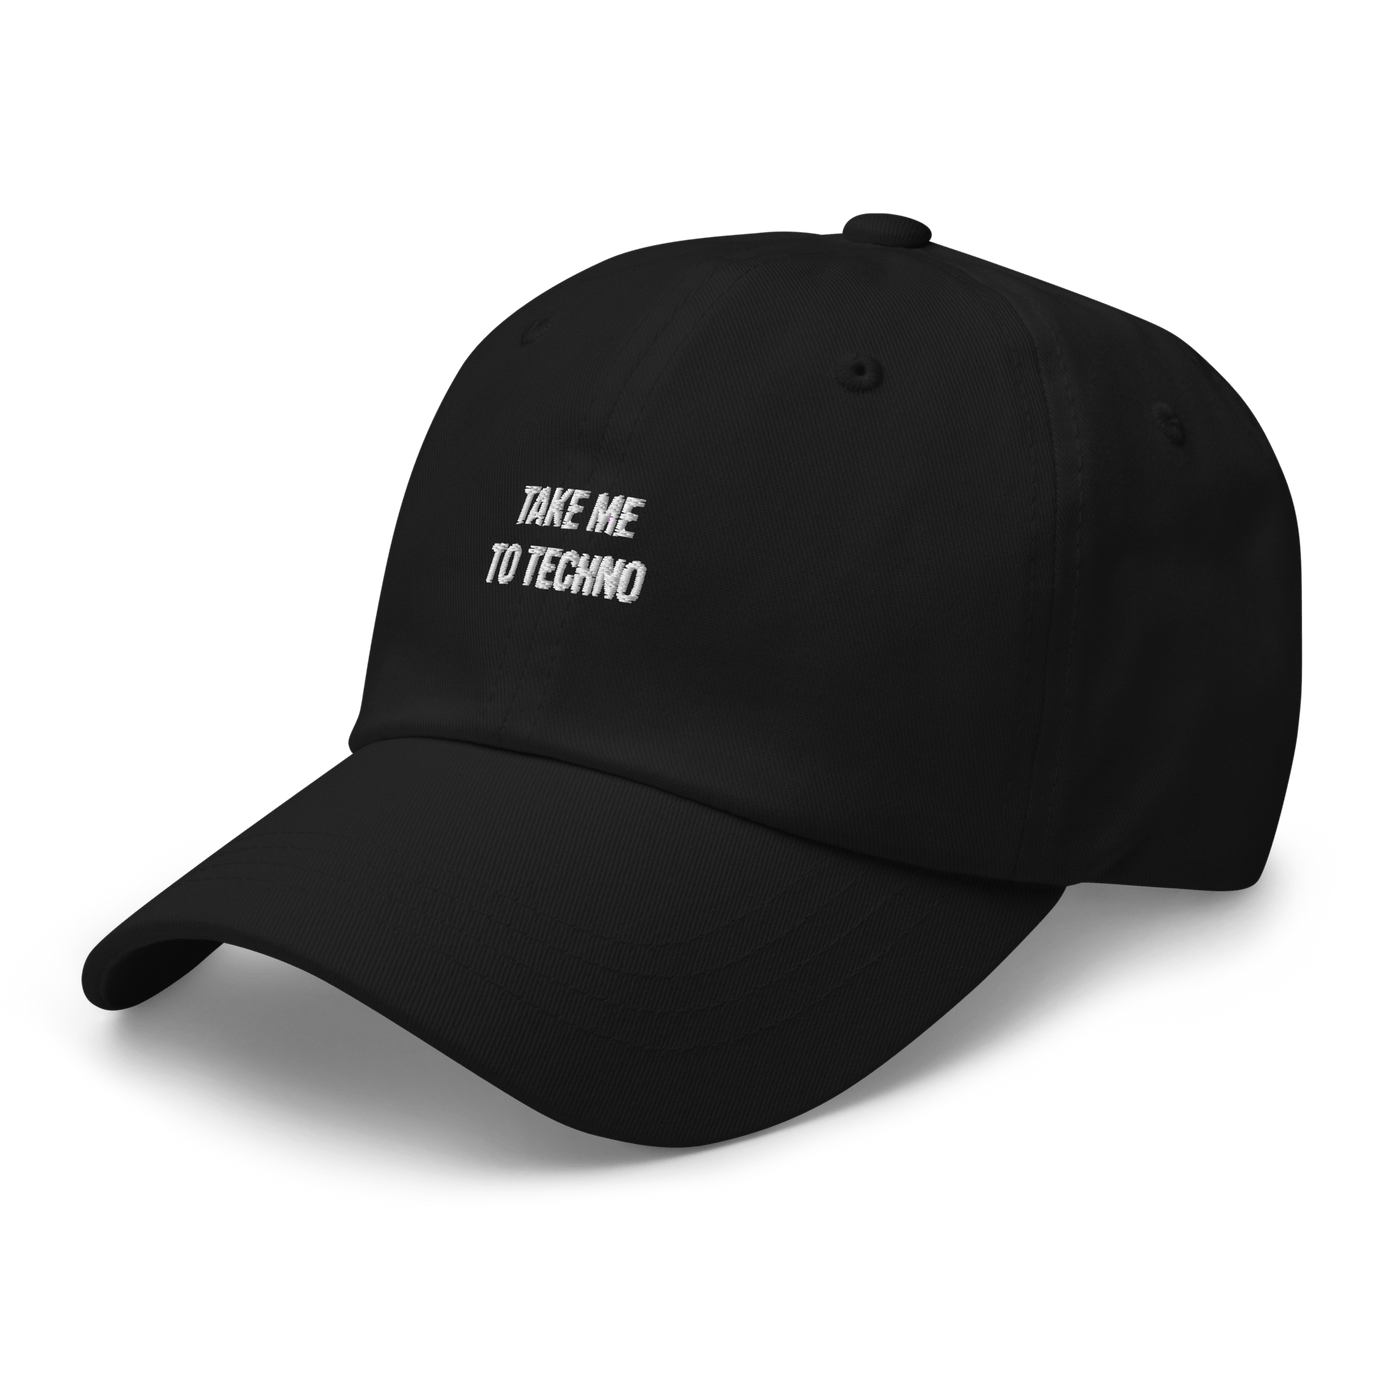 Take me to techno Dad Hat - Black - - Just Another Cap Store